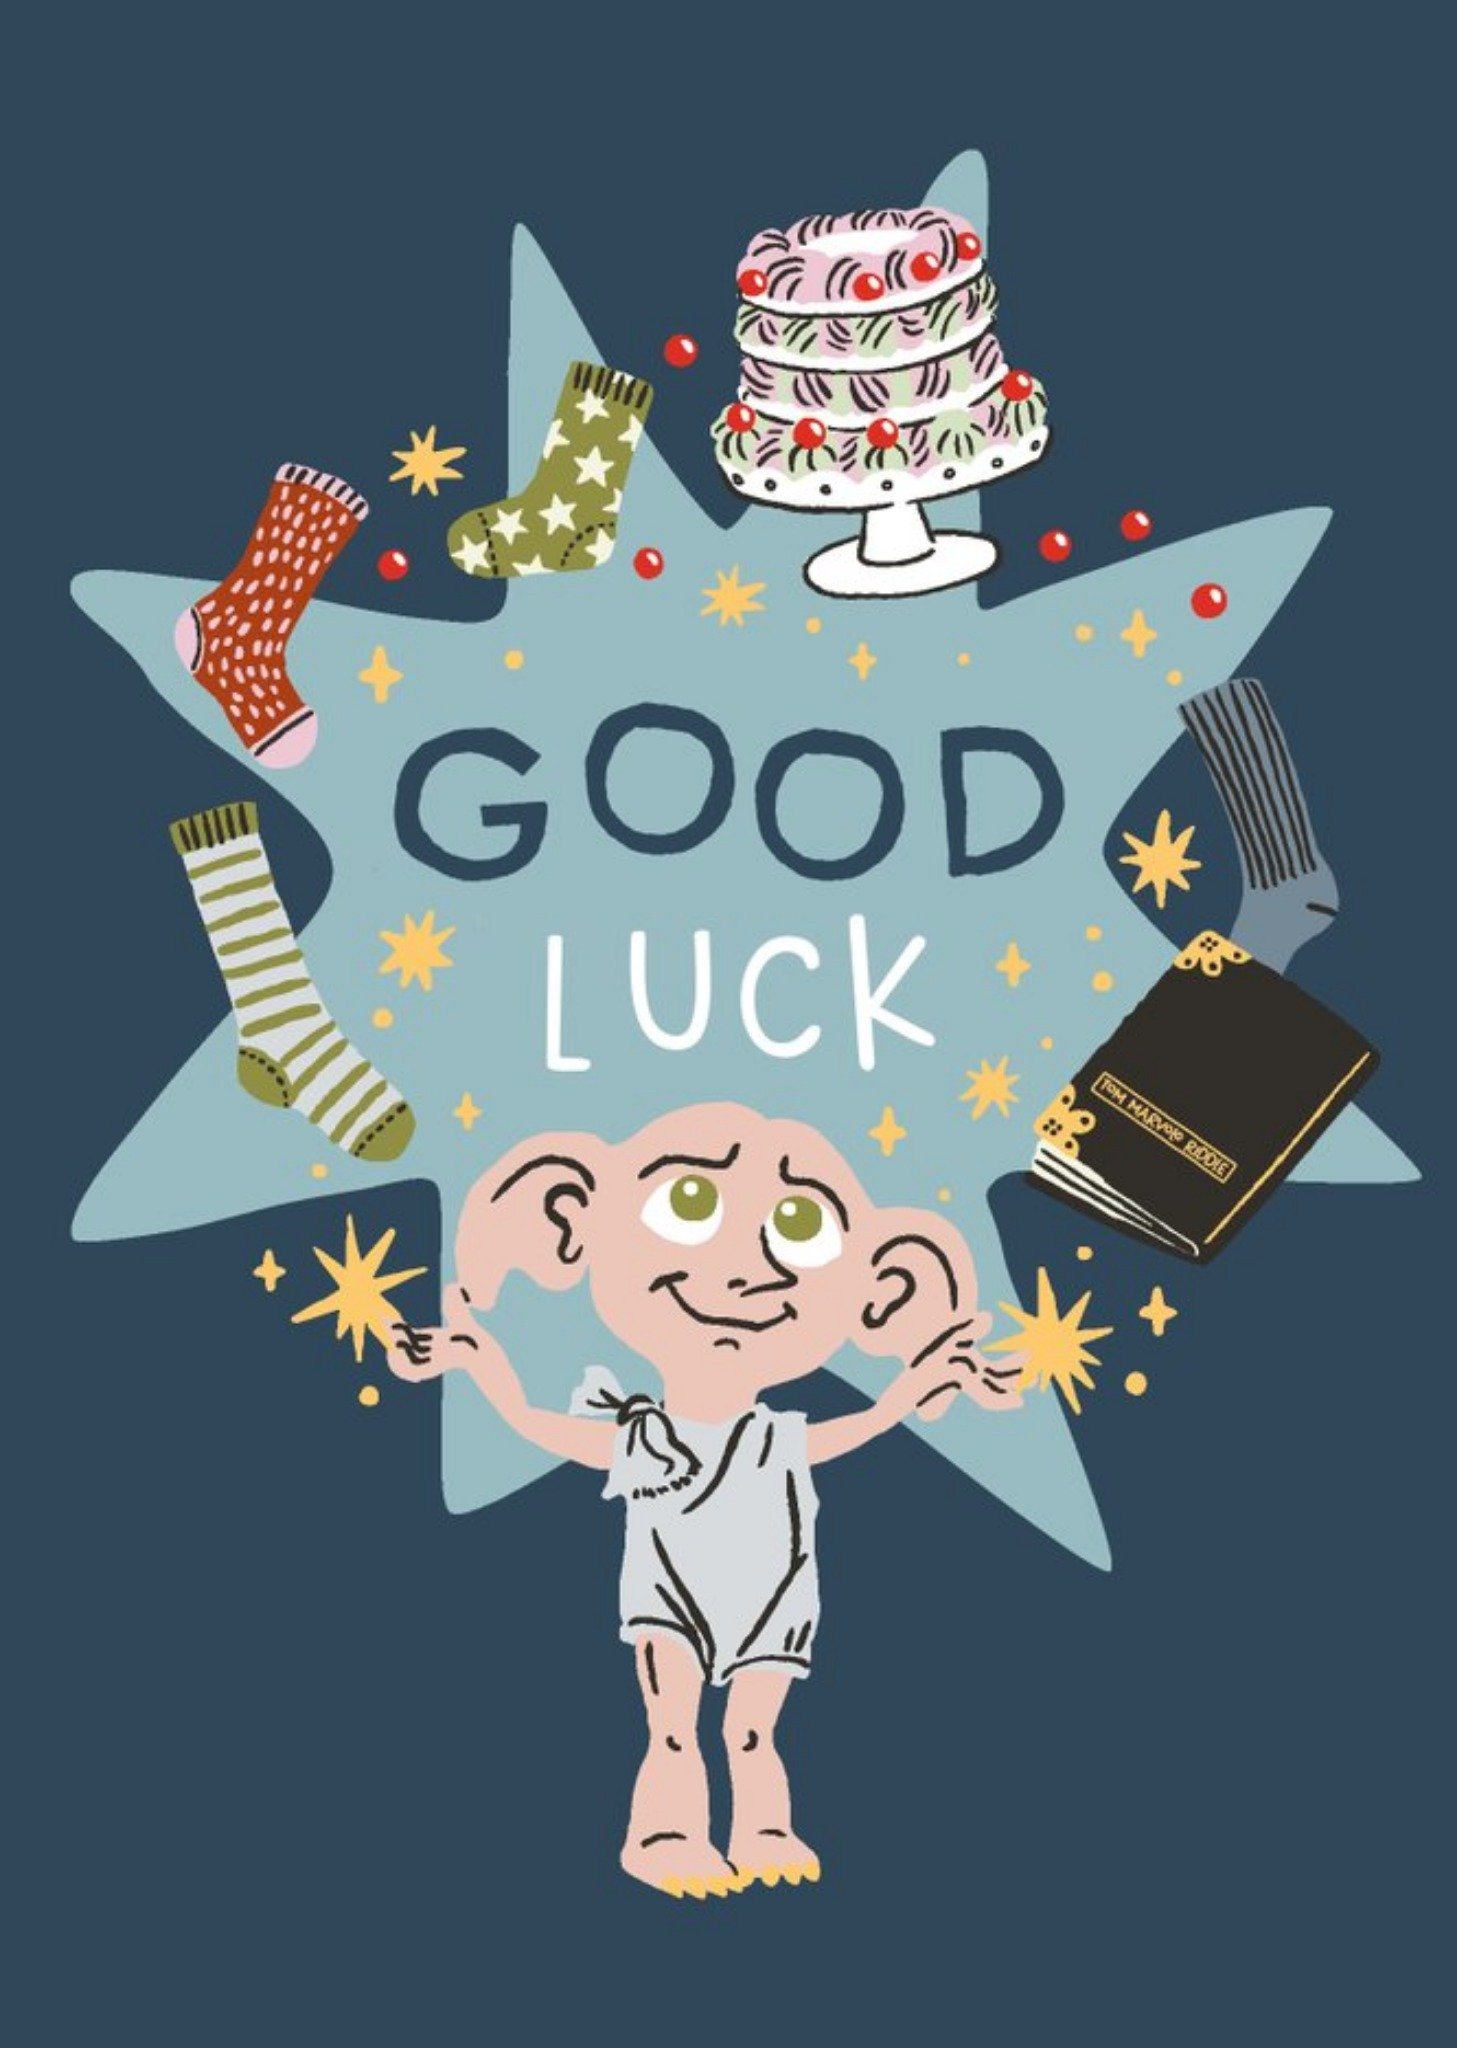 Harry Potter Dobby The House Elf Illustrated Good Luck Card, Large